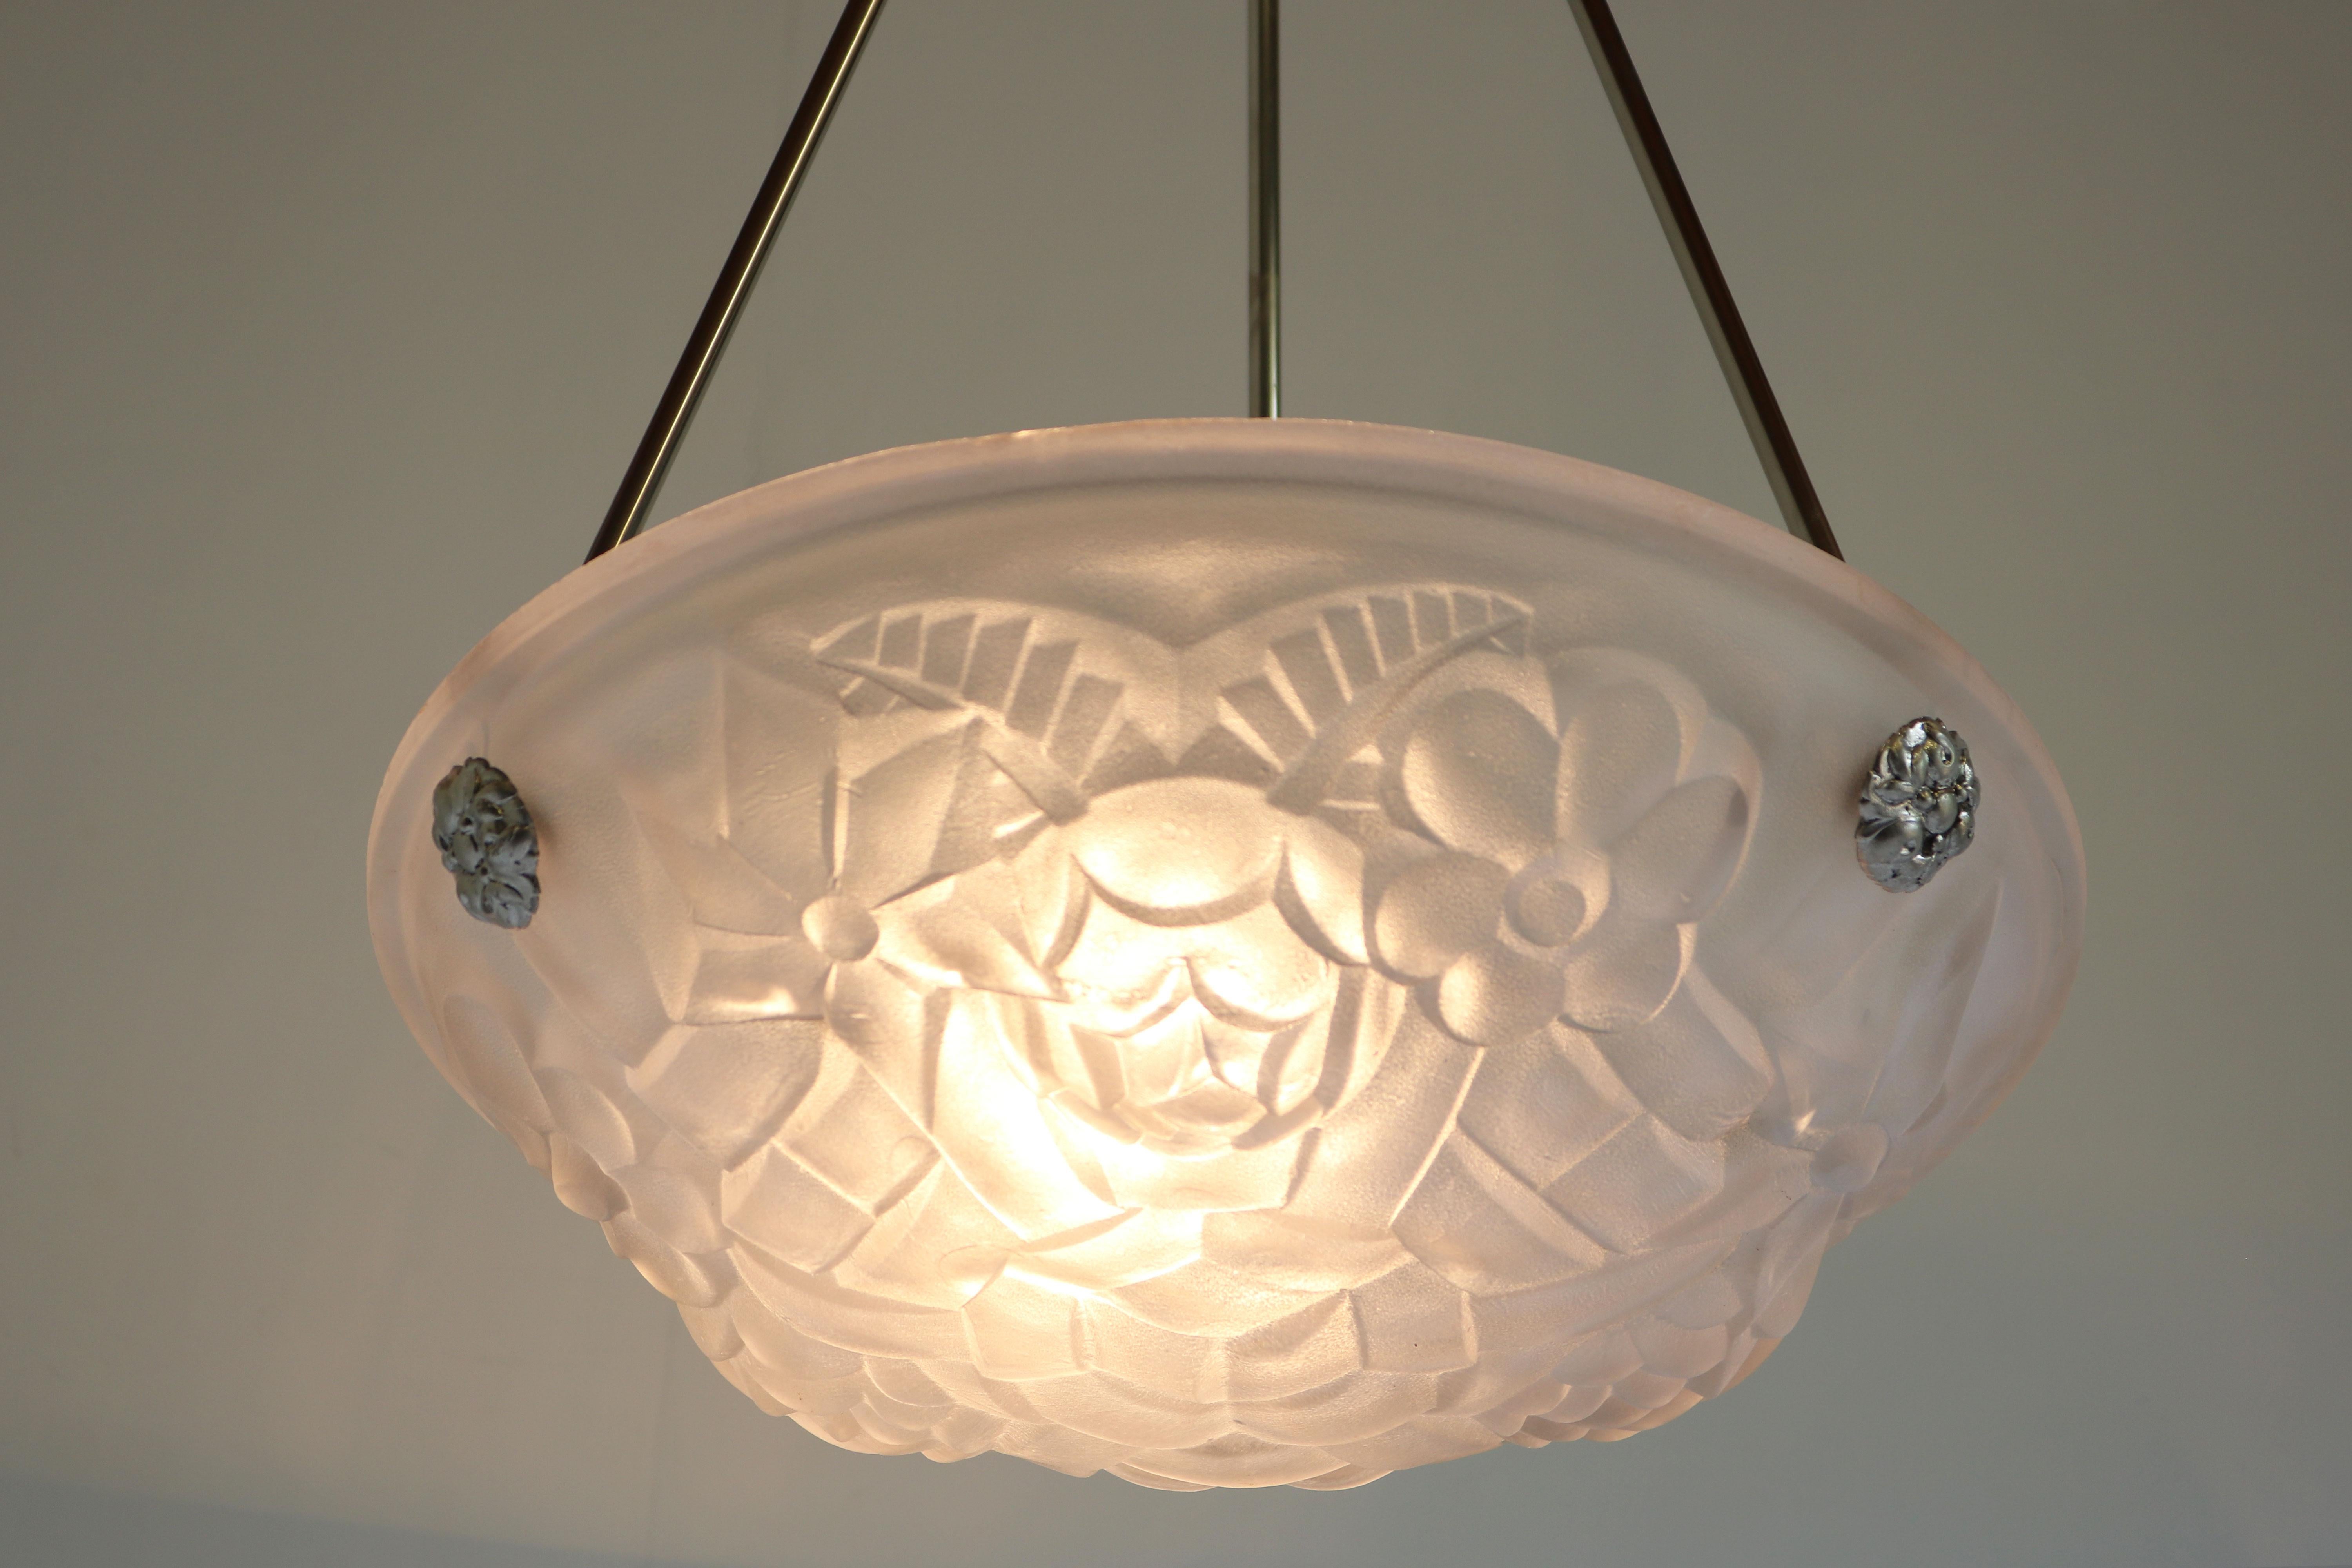 Gorgeous & timeless! This French Art Deco pendant by David Gueron Degue 1930. 
Marvelous white frosted glass shade with floral Art Deco motives. 
The chandelier comes with the original suspension in silver. The canopy has an amazing open floral